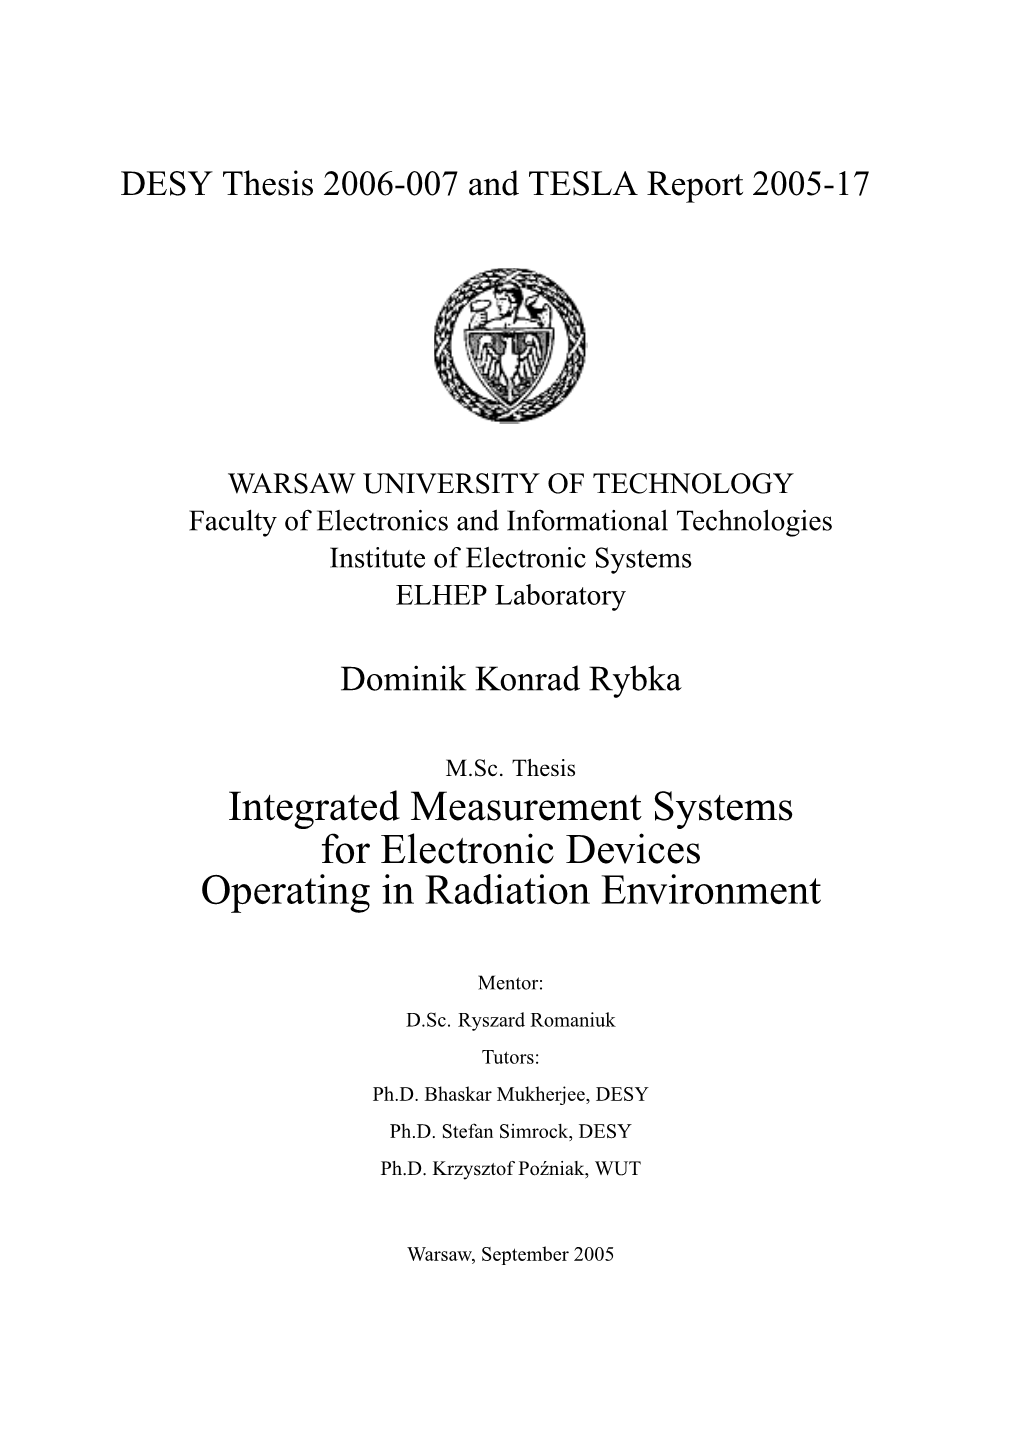 Integrated Measurement Systems for Electronic Devices Operating in Radiation Environment